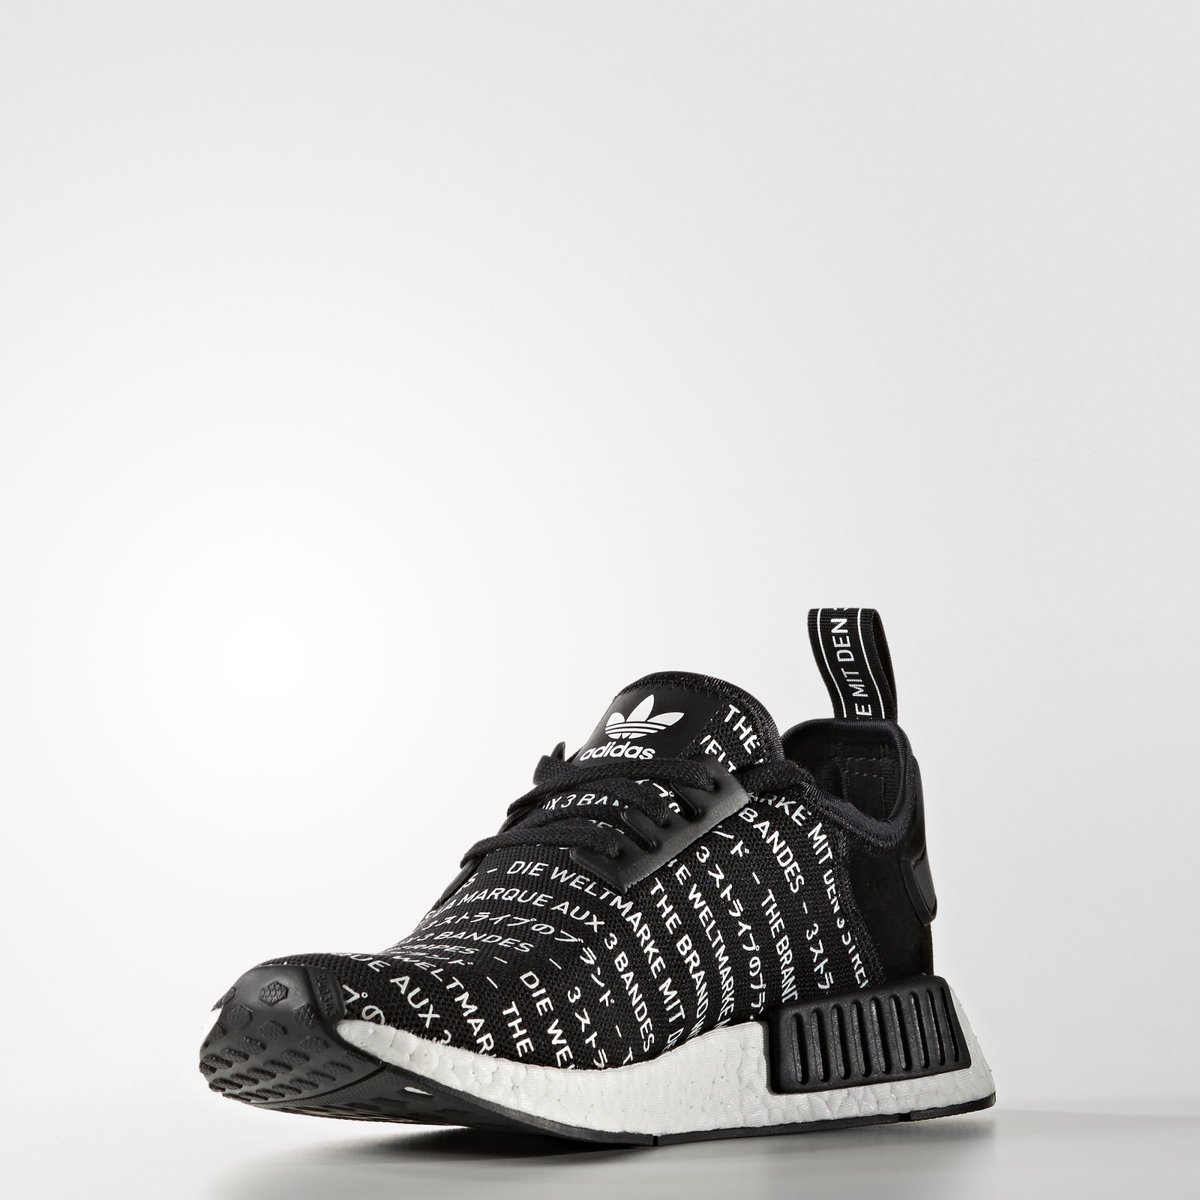 nmd black with white writing cheap online